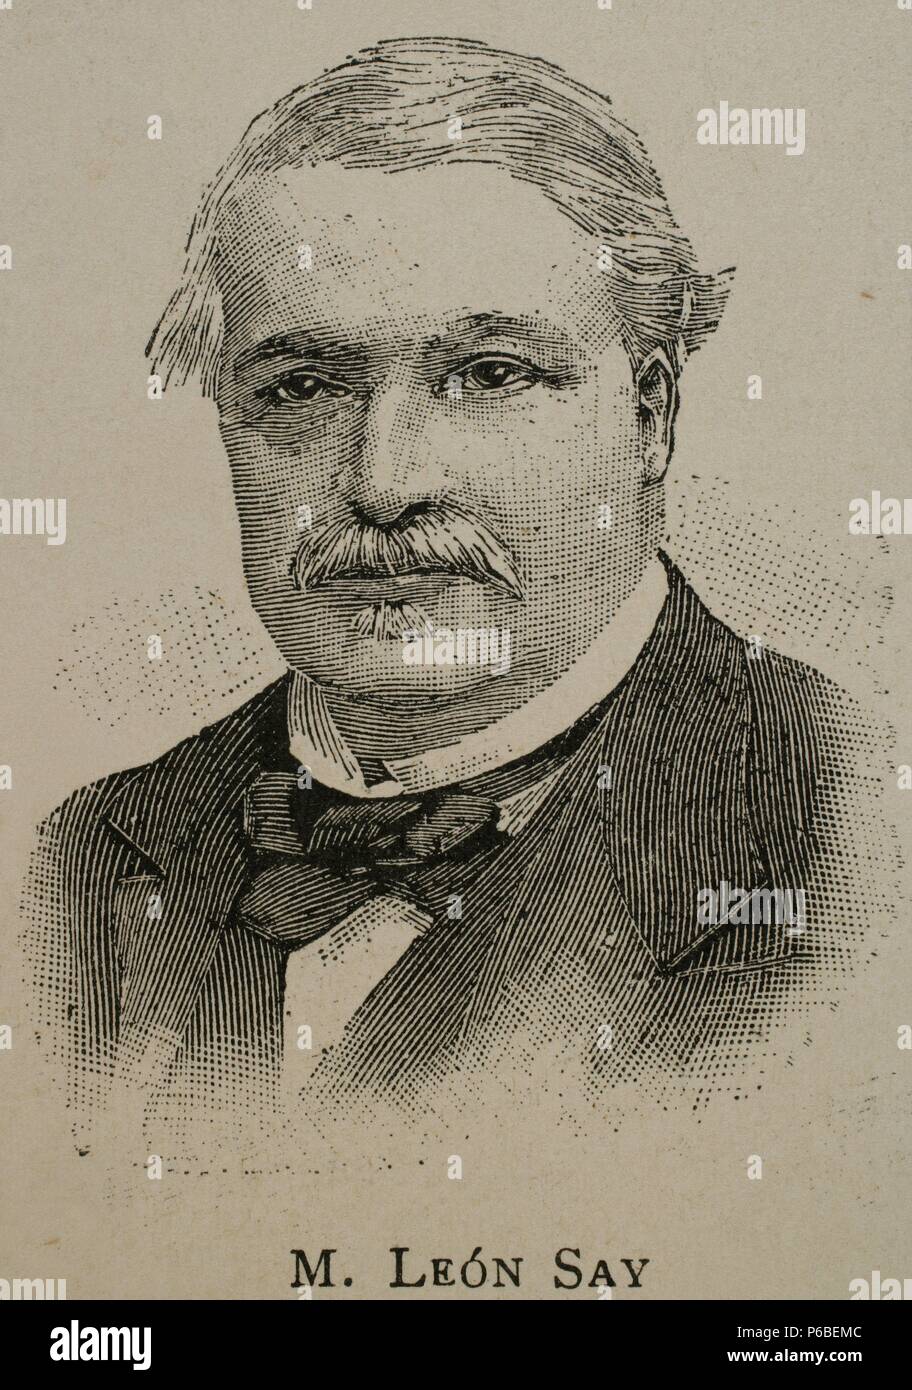 Jean-Baptiste Leon Say (1826-1896). French economist and statesman. Engraving in The Artistic Illustration, 1896. Stock Photo